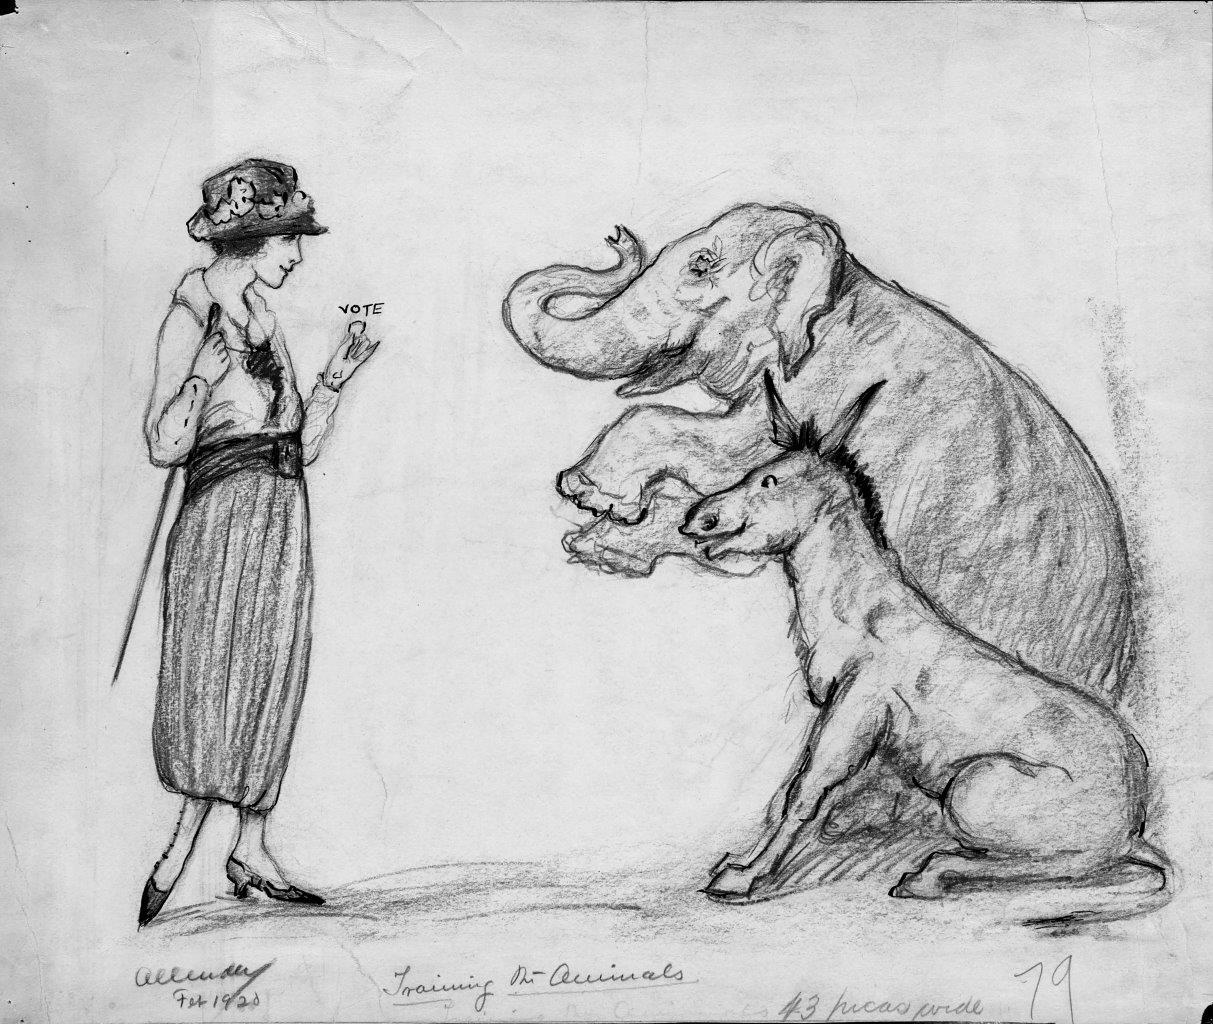 Drawing of a woman holding a treat labeled "vote" for an elephant and a donkey